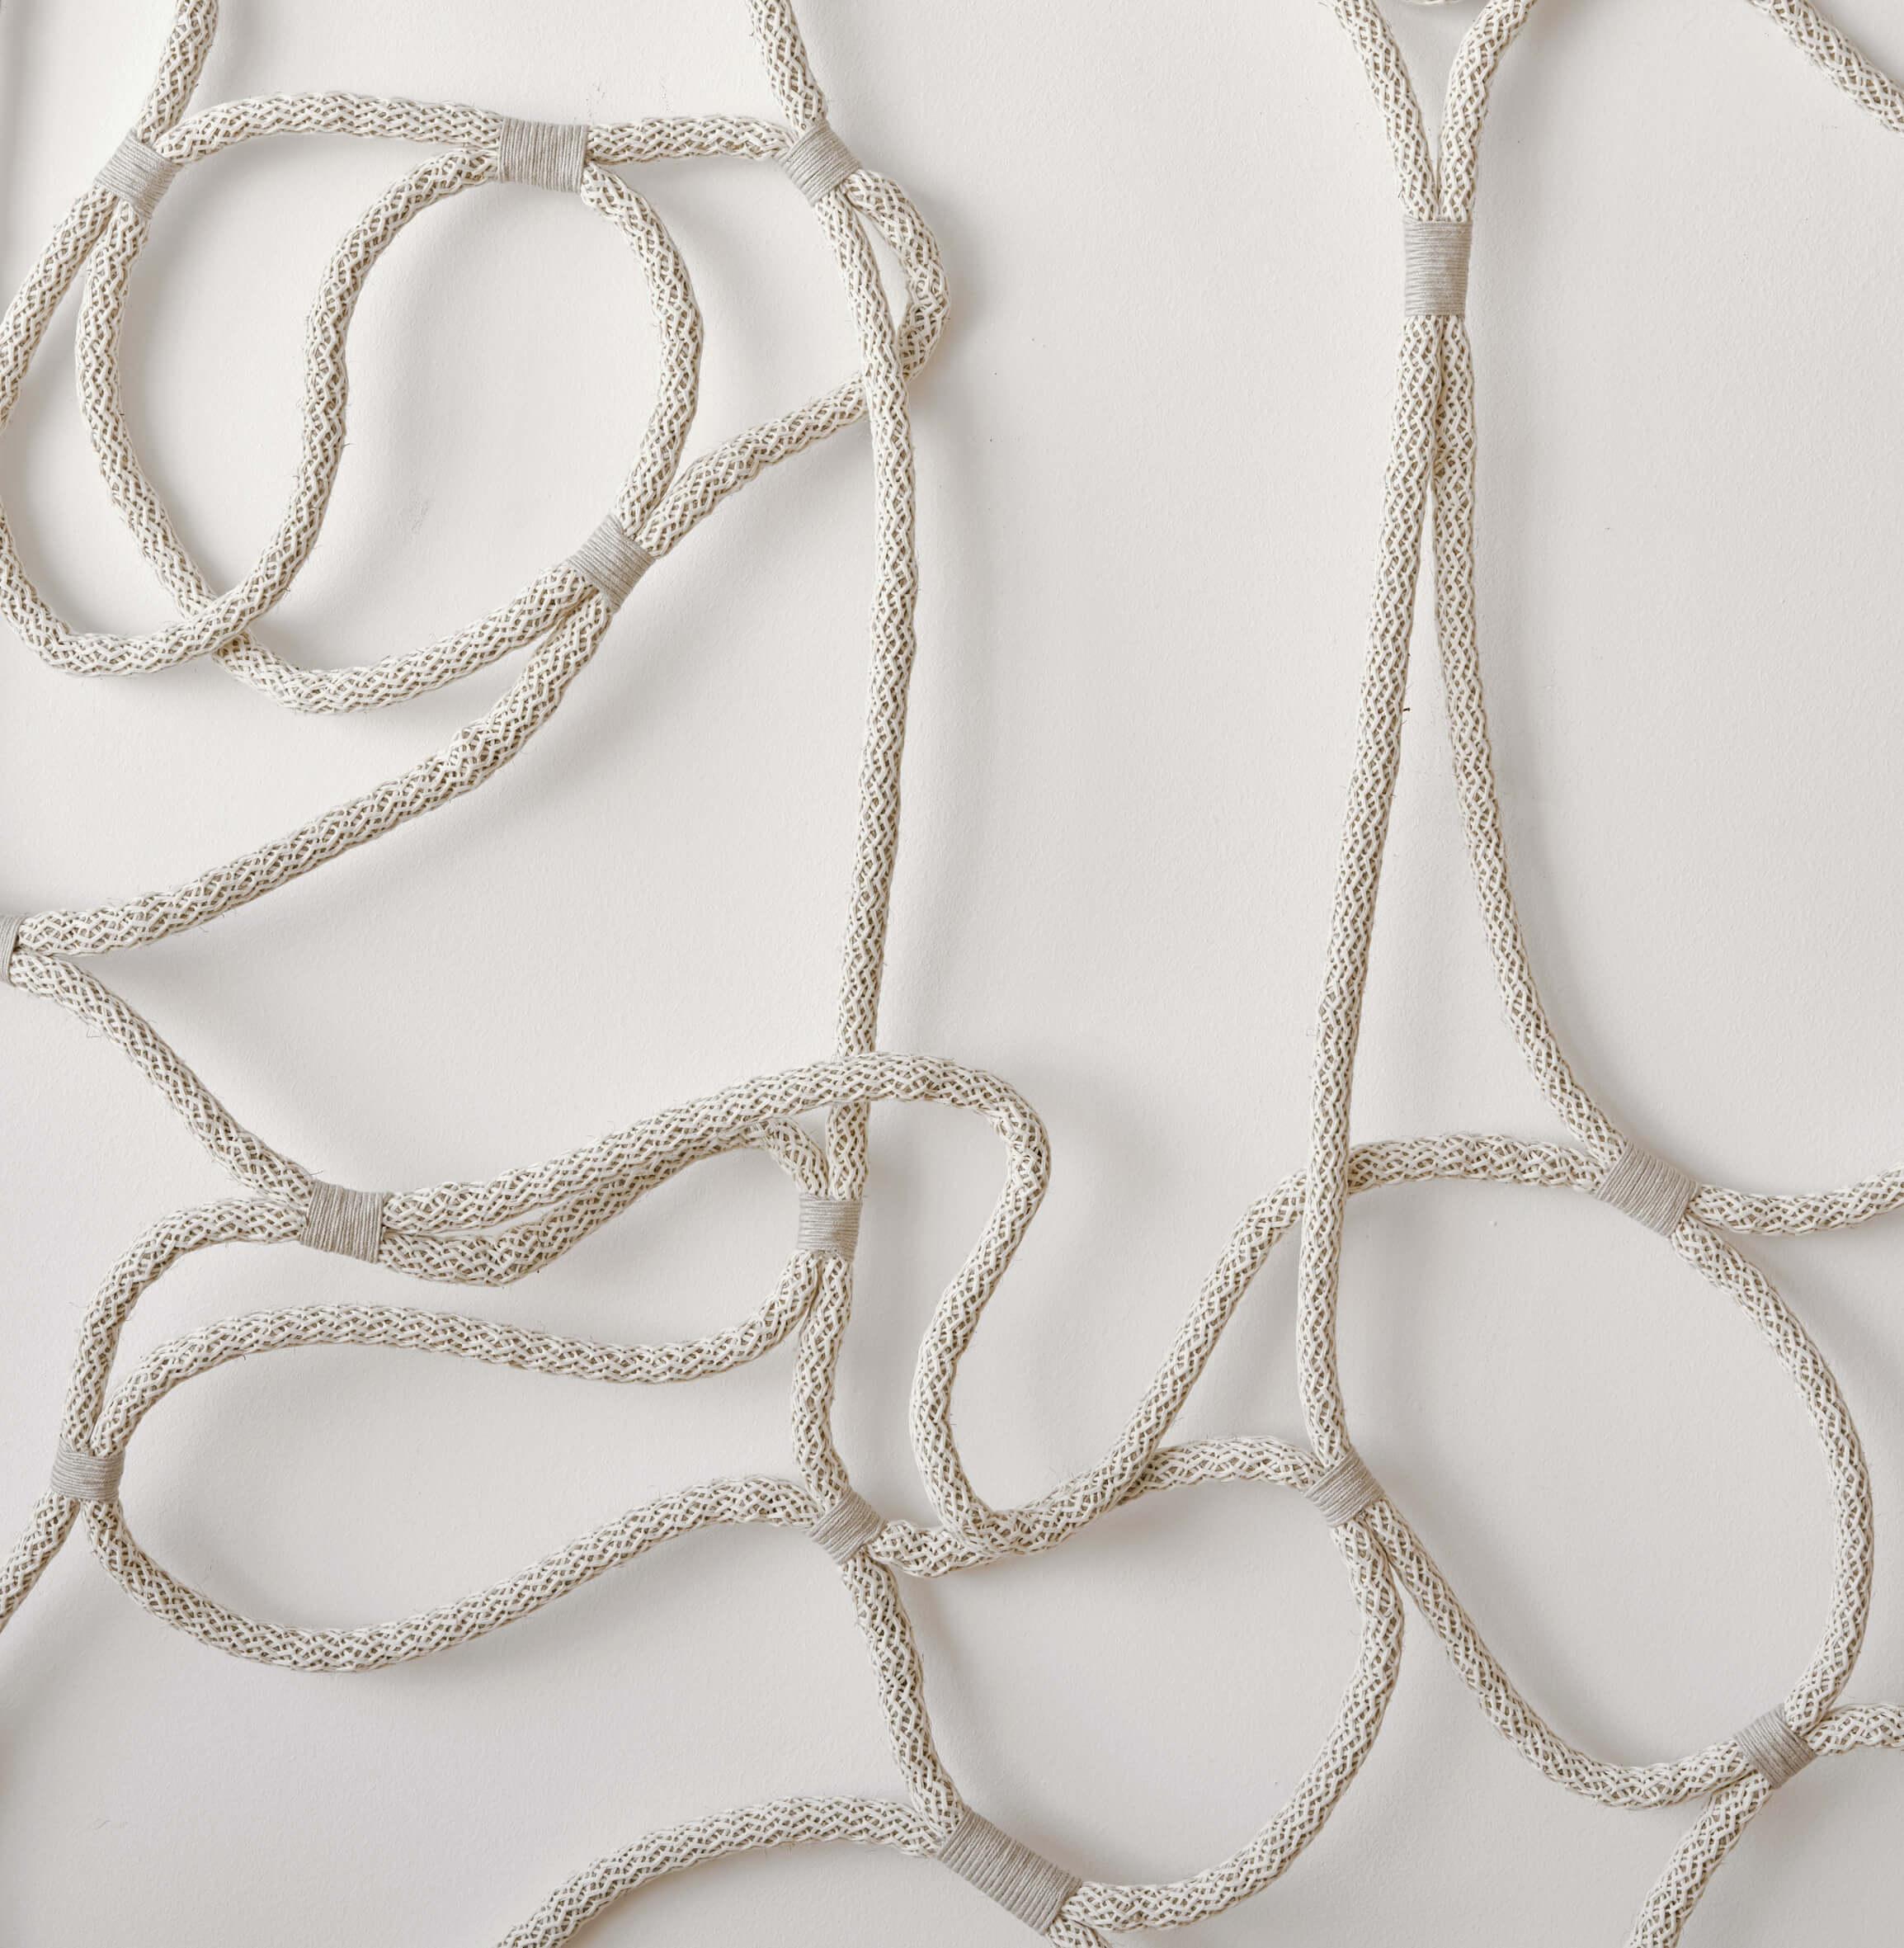 White shibari ropes on a white background which are used in kink and bdsm acts of bondage